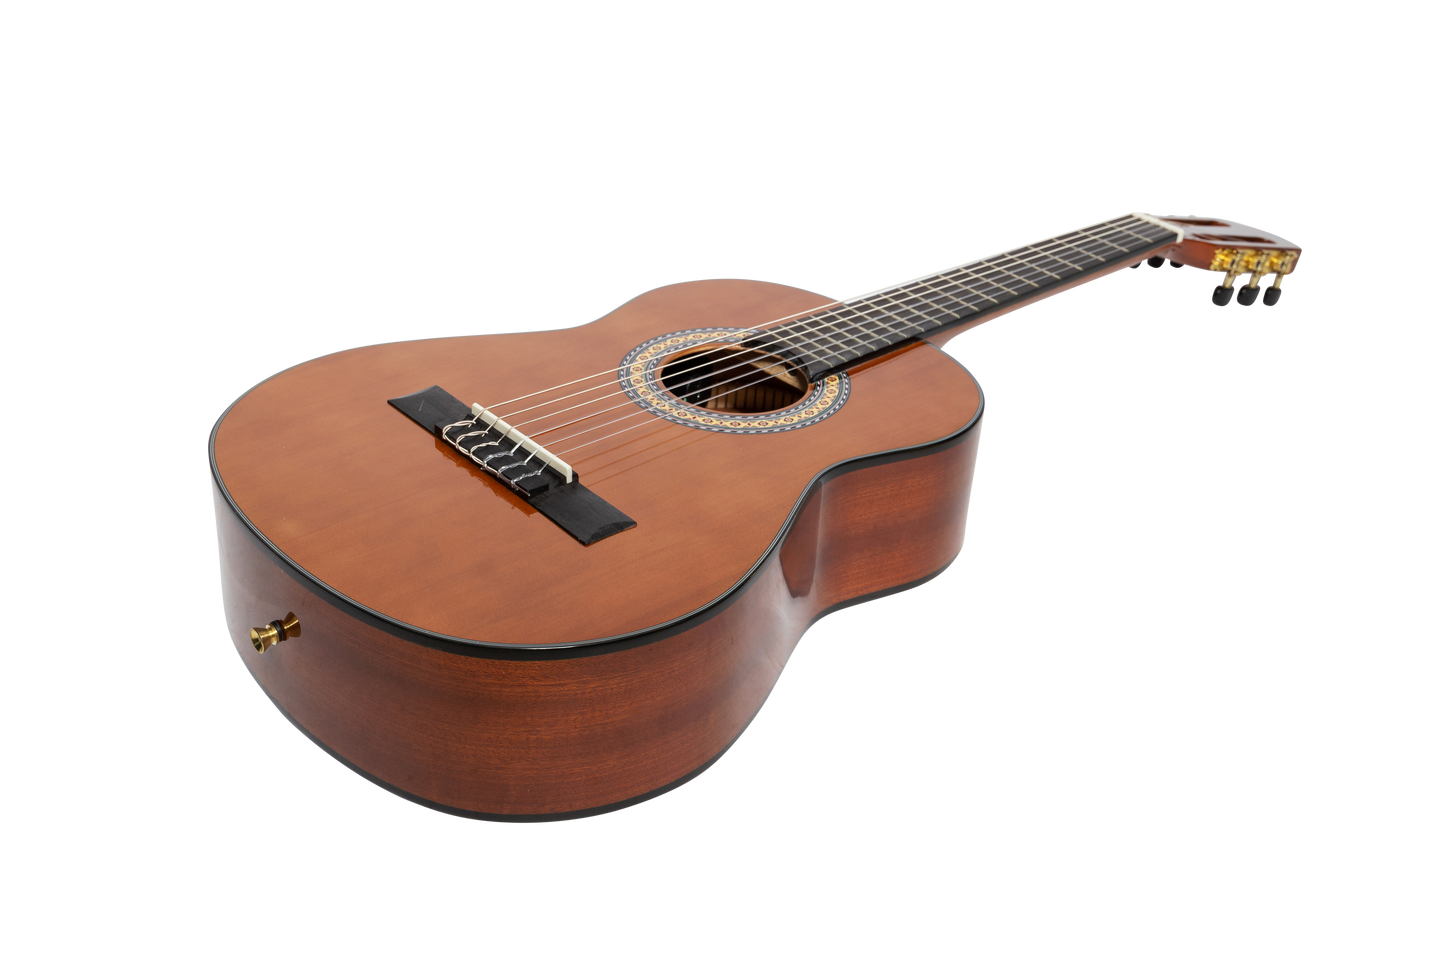 Martinez G-Series 1/2 Size Student Classical Guitar Pack with Built In Tuner (Natural-Gloss)